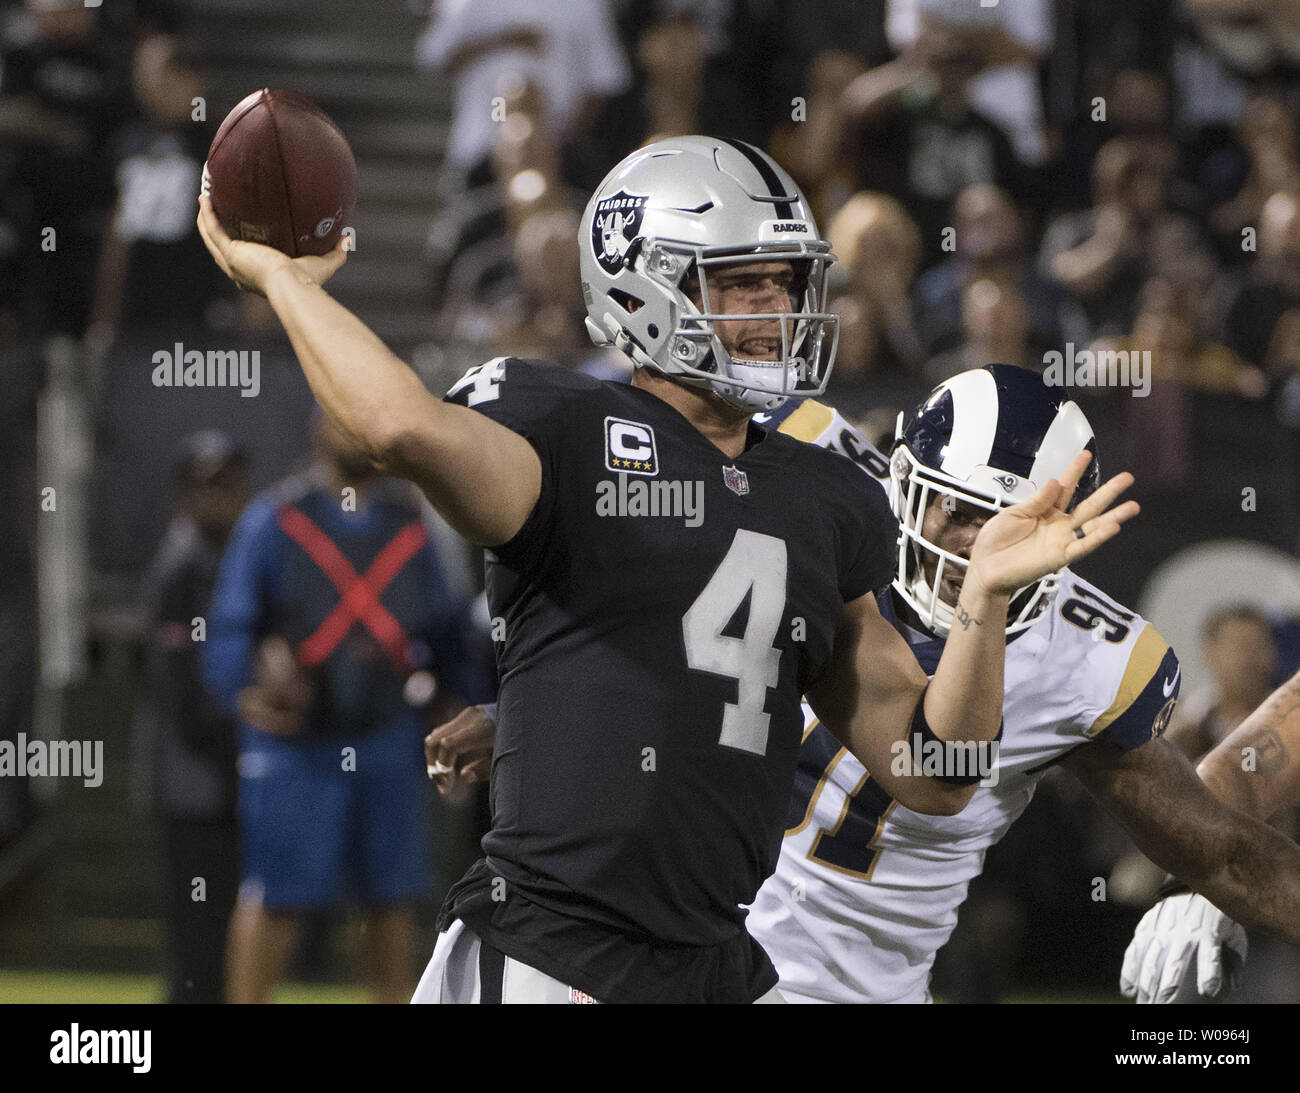 Oakland Raiders QB Derek Carr (4) rolls out to pass against the Los Angeles Rams in the first quarter at the Coliseum in Oakland, California on Monday, September 10, 2018. Carr threw three interceptions as the Rams defeated the Raiders 33-13.       Photo by Terry Schmitt/UPI Stock Photo